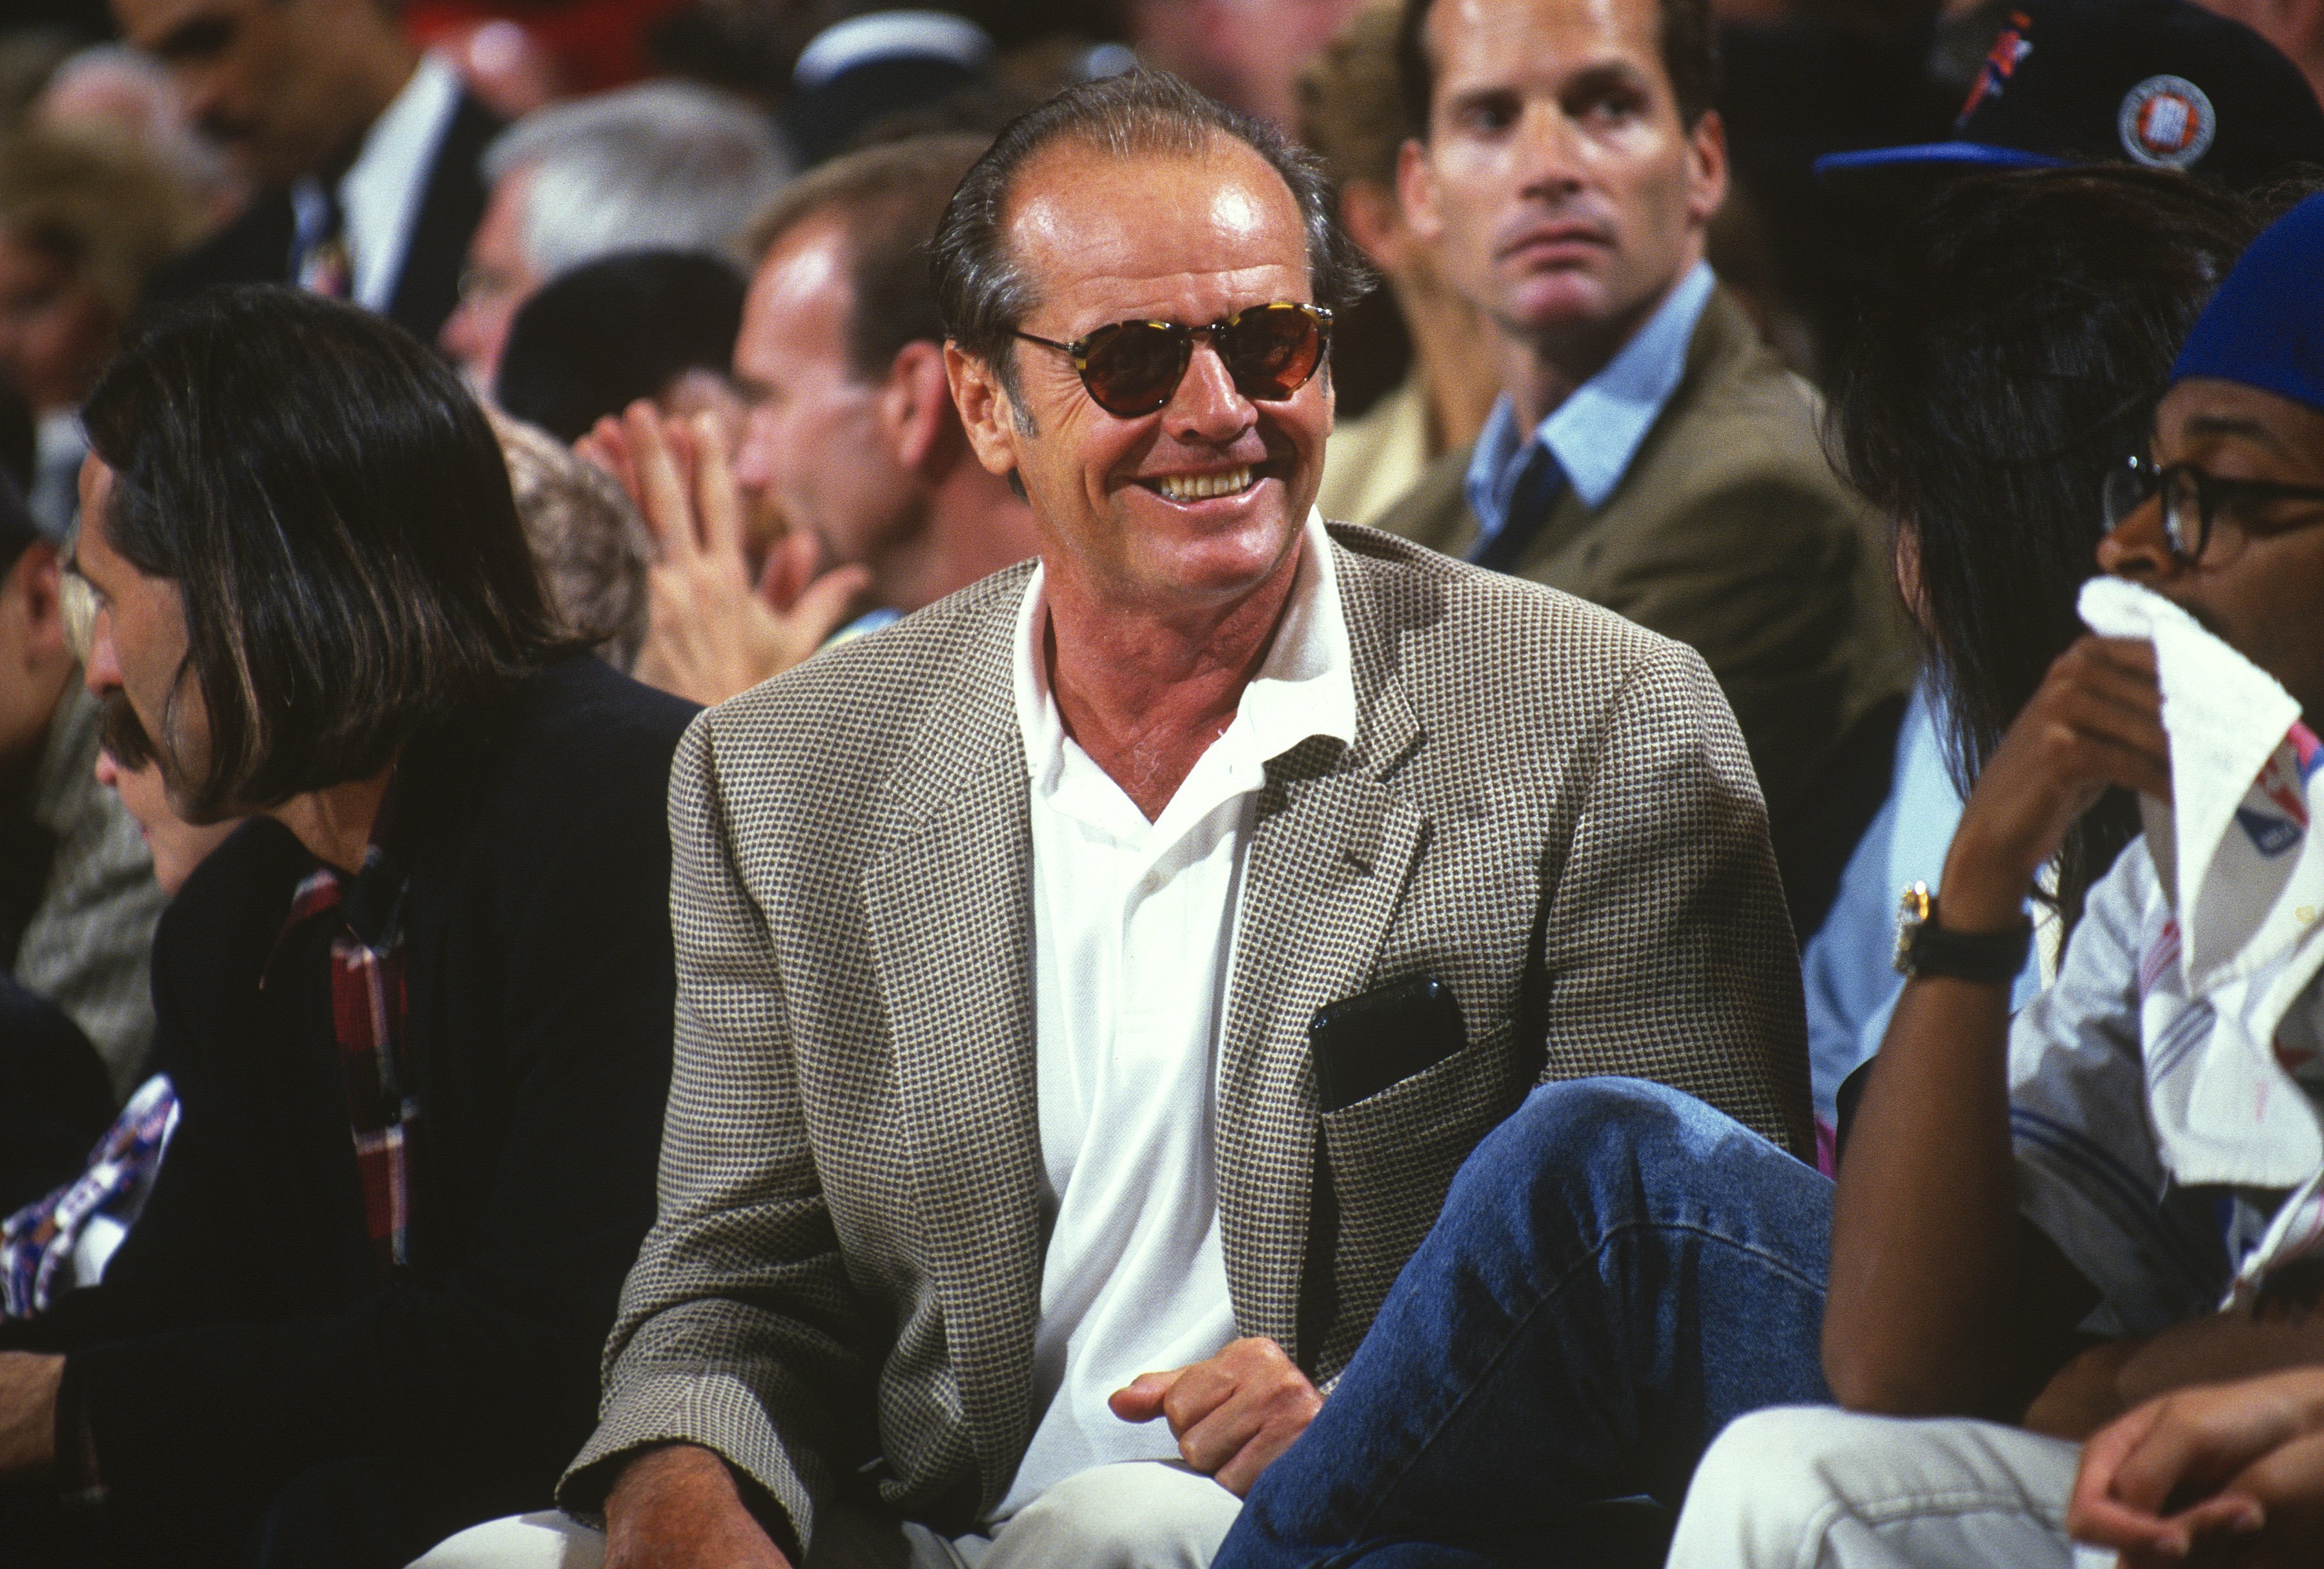 Jack Nicholson looks on during the 1994 NBA Finals between the Houston Rockets and the New York Knicks at Madison Square Garden in the Manhattan Borough of New York City circa 1994. | Source: Getty Images.